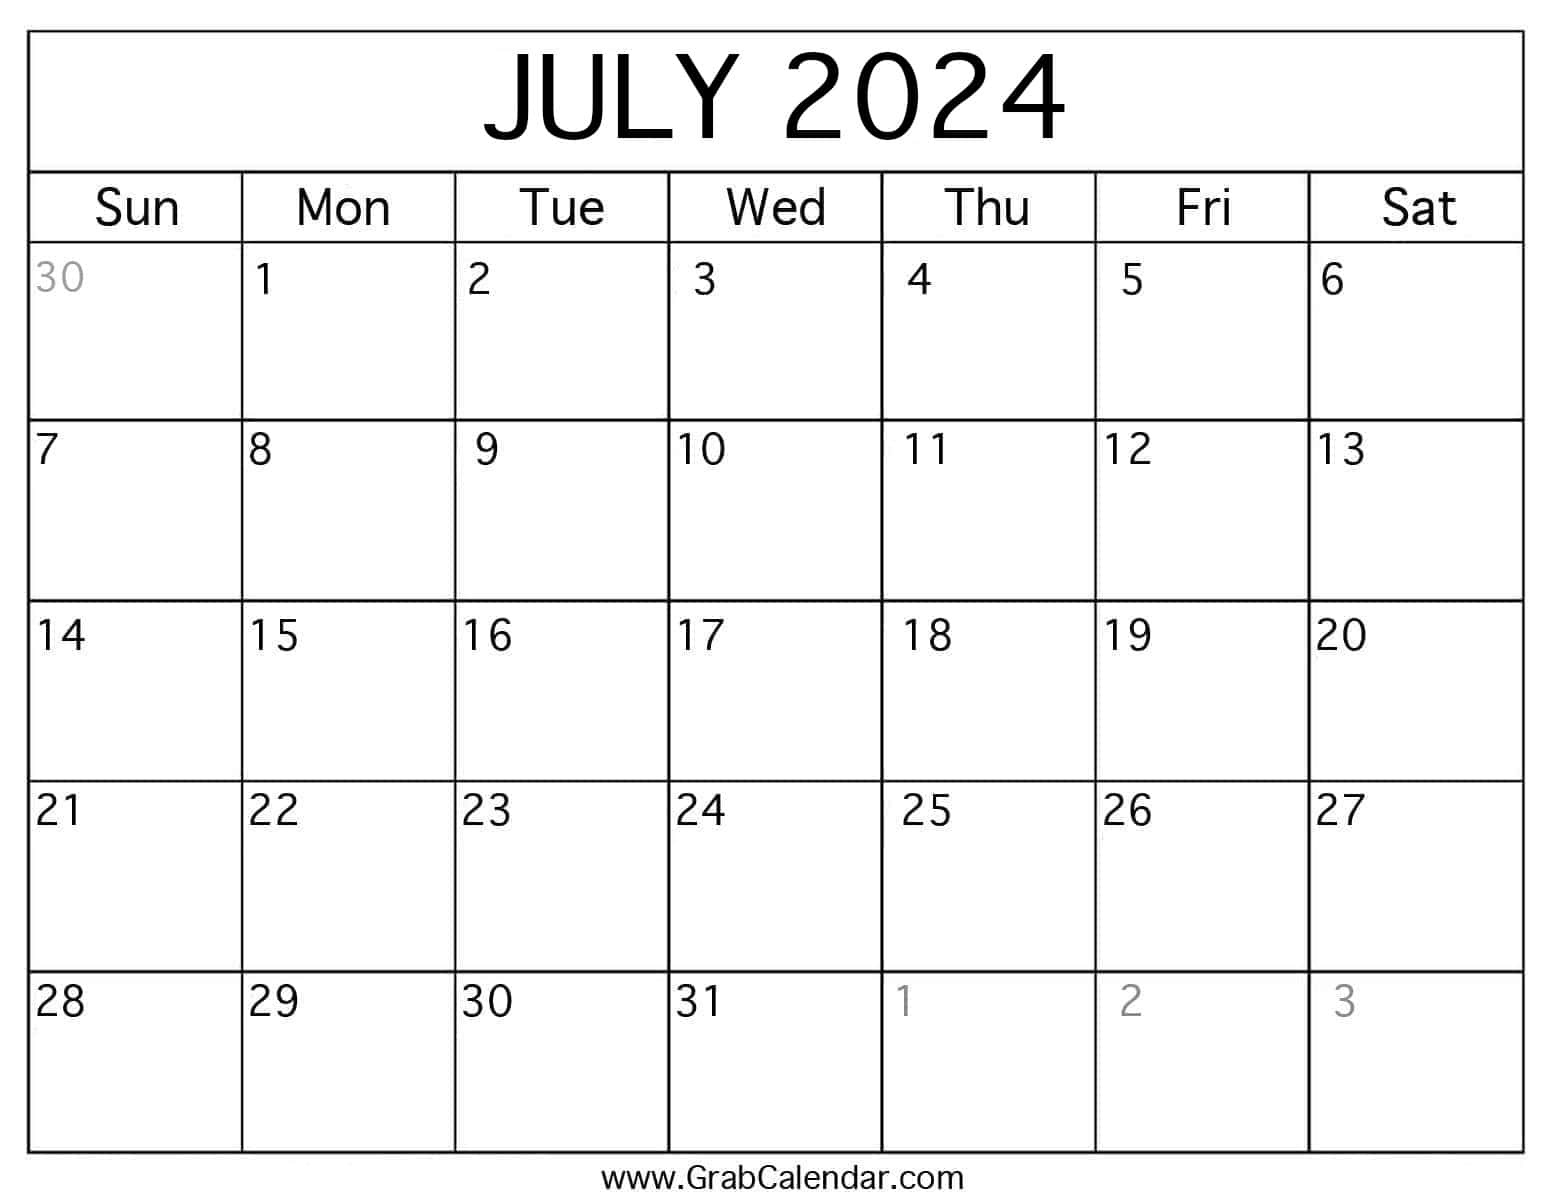 Printable July 2024 Calendar pertaining to Calendar of Events July 2024